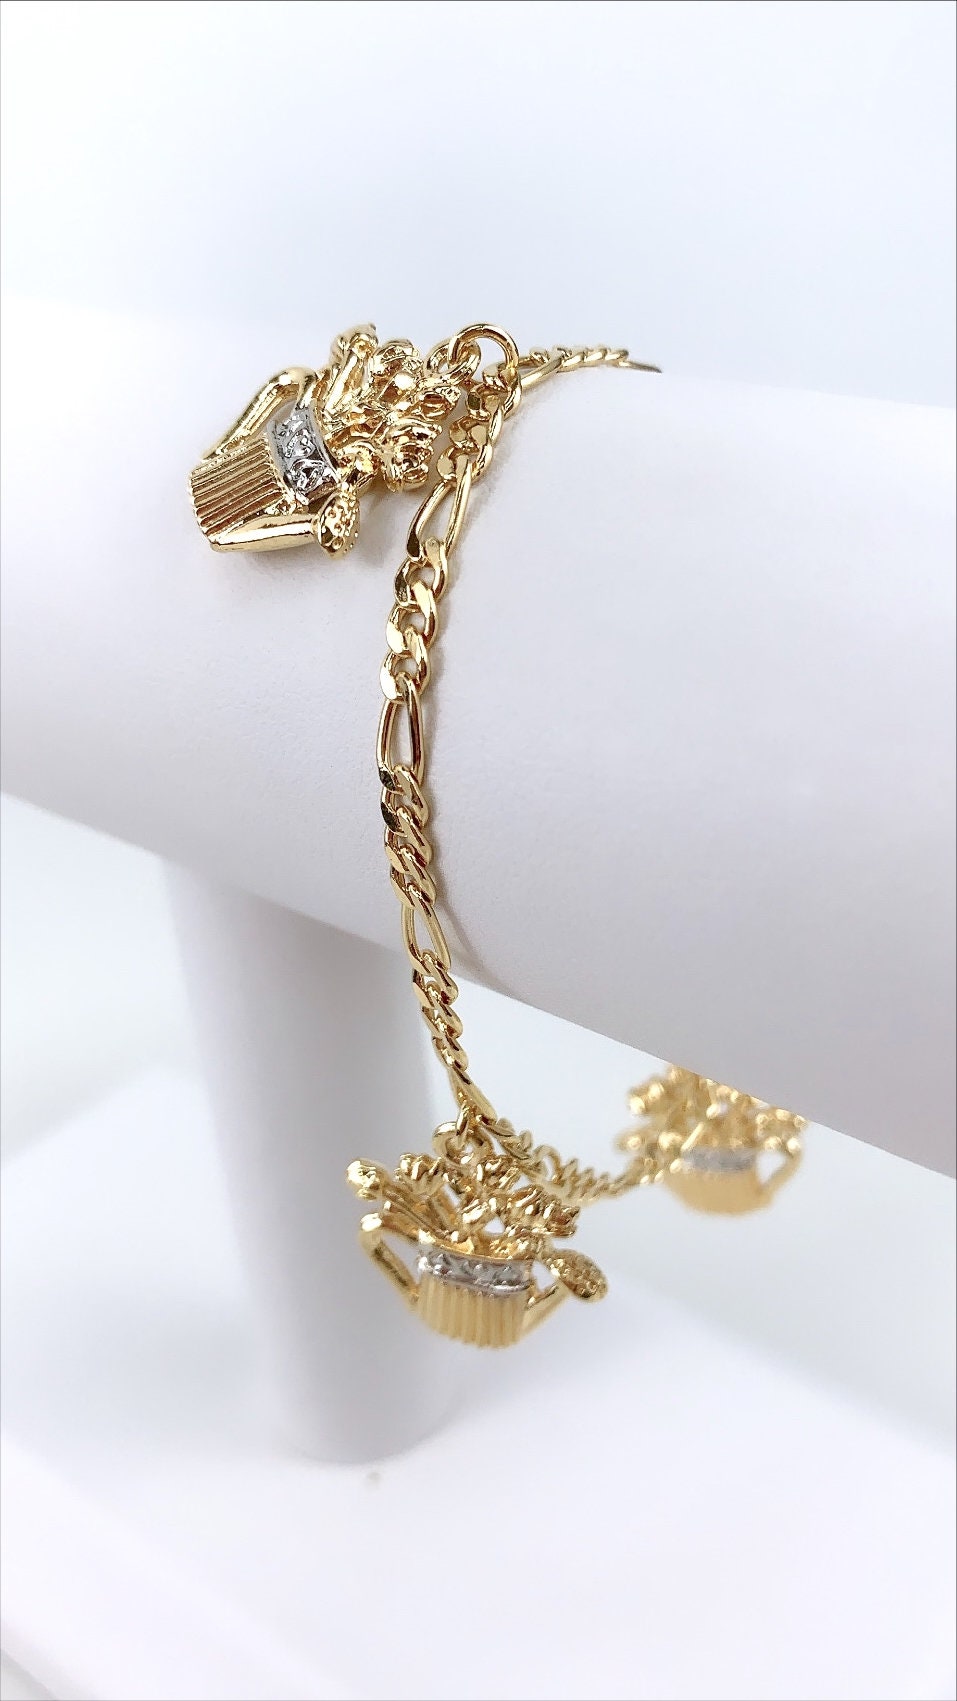 18k Gold Filled Figaro Chain with Watering with Flowers Pendant Bracelet and  Earrings Wholesale Jewelry Supplies